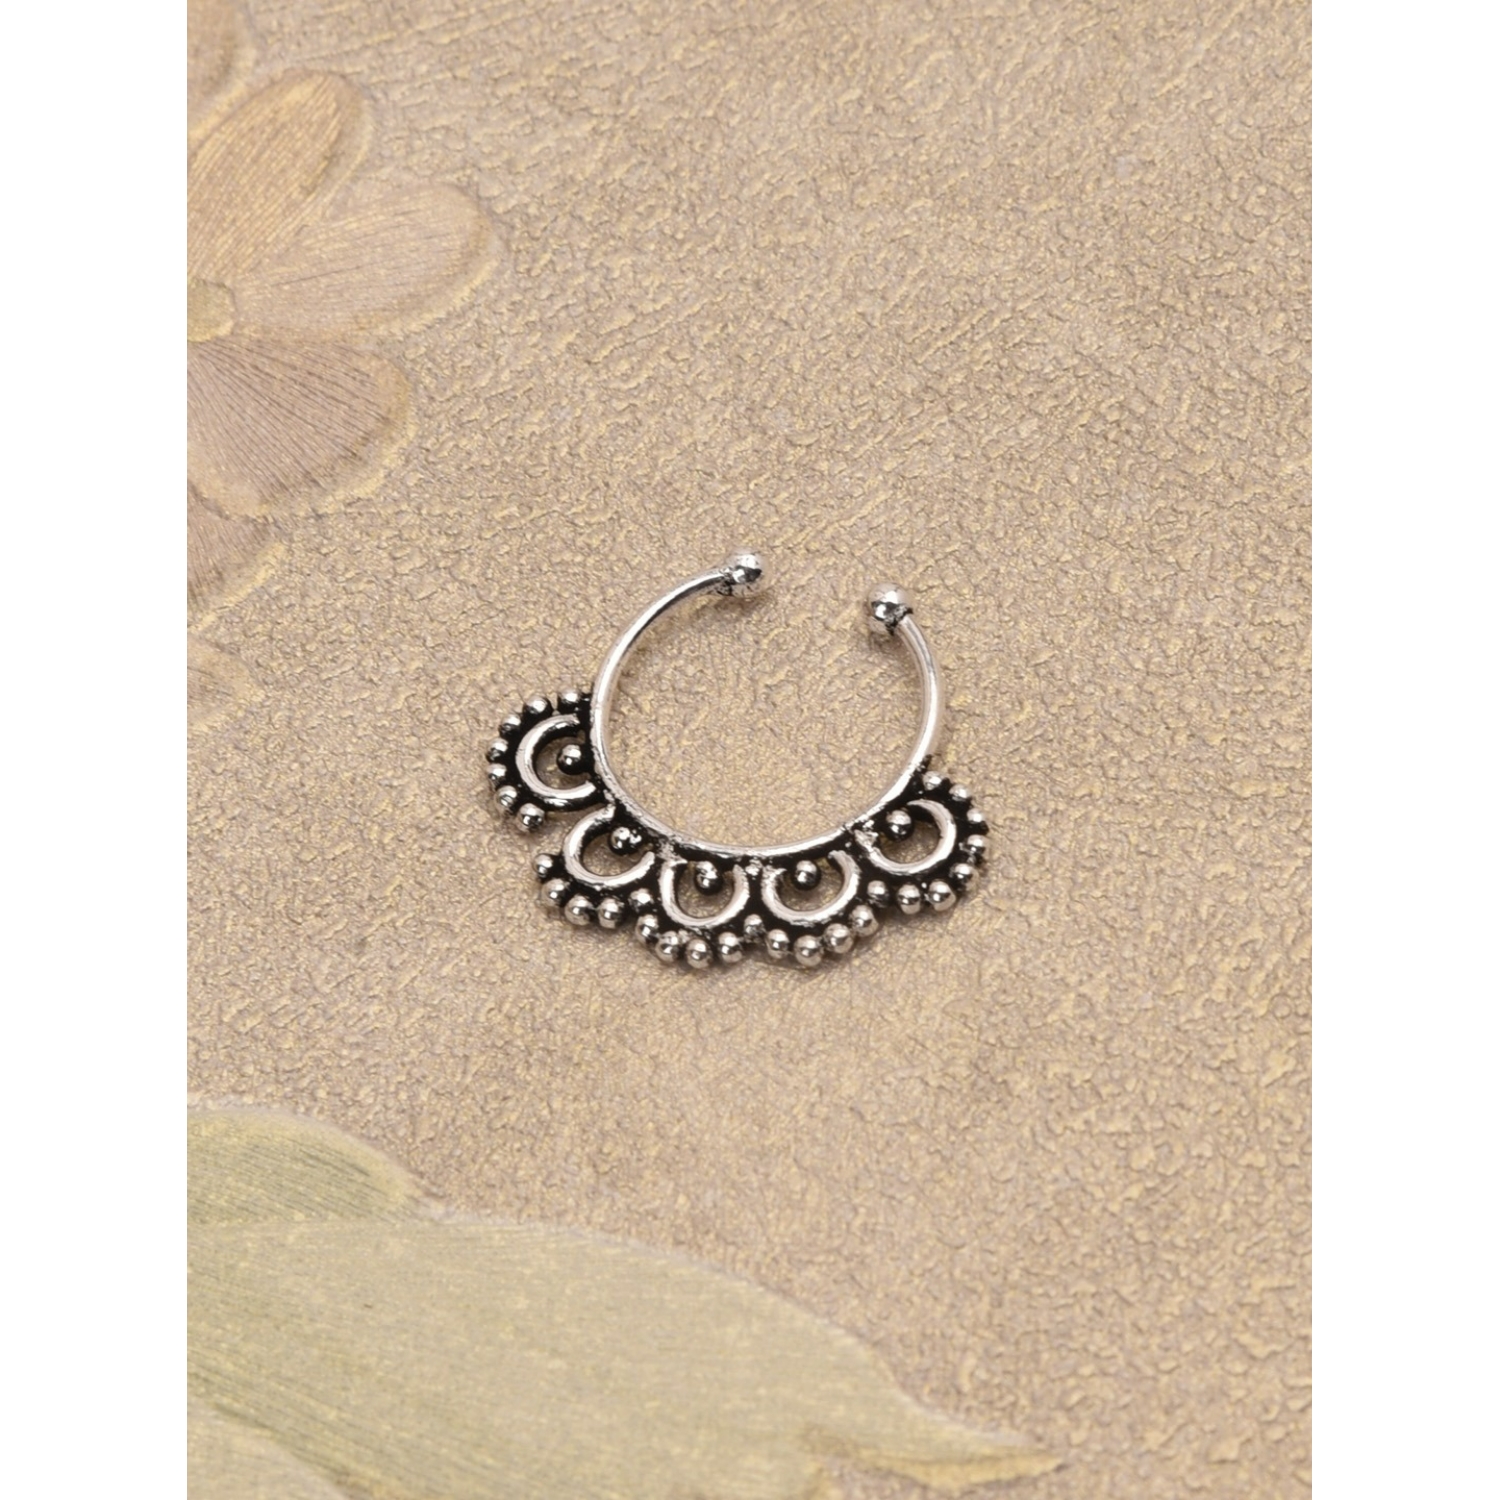 Buy Enamel Yin Yang Nose Stud Ring Online at Low Prices in India | Amazon  Jewellery Store - Amazon.in